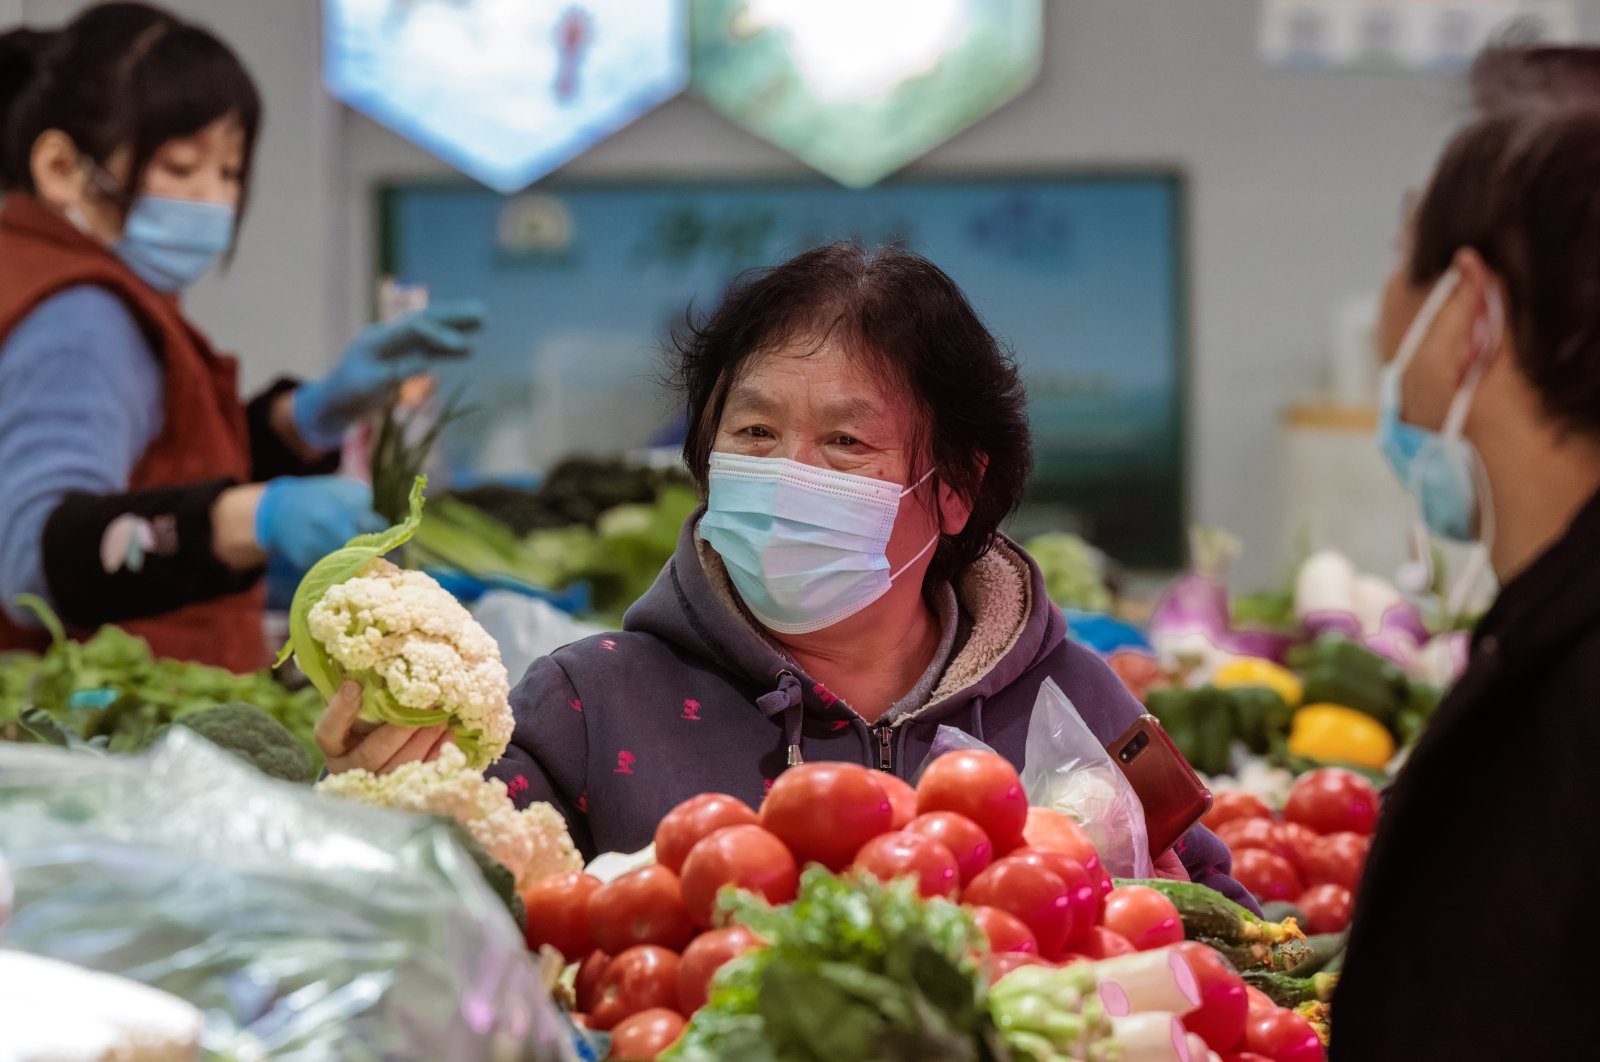 A woman buys vegetables from a wet market in Shanghai, China, Jan. 11, 2023. (EPA Photo)